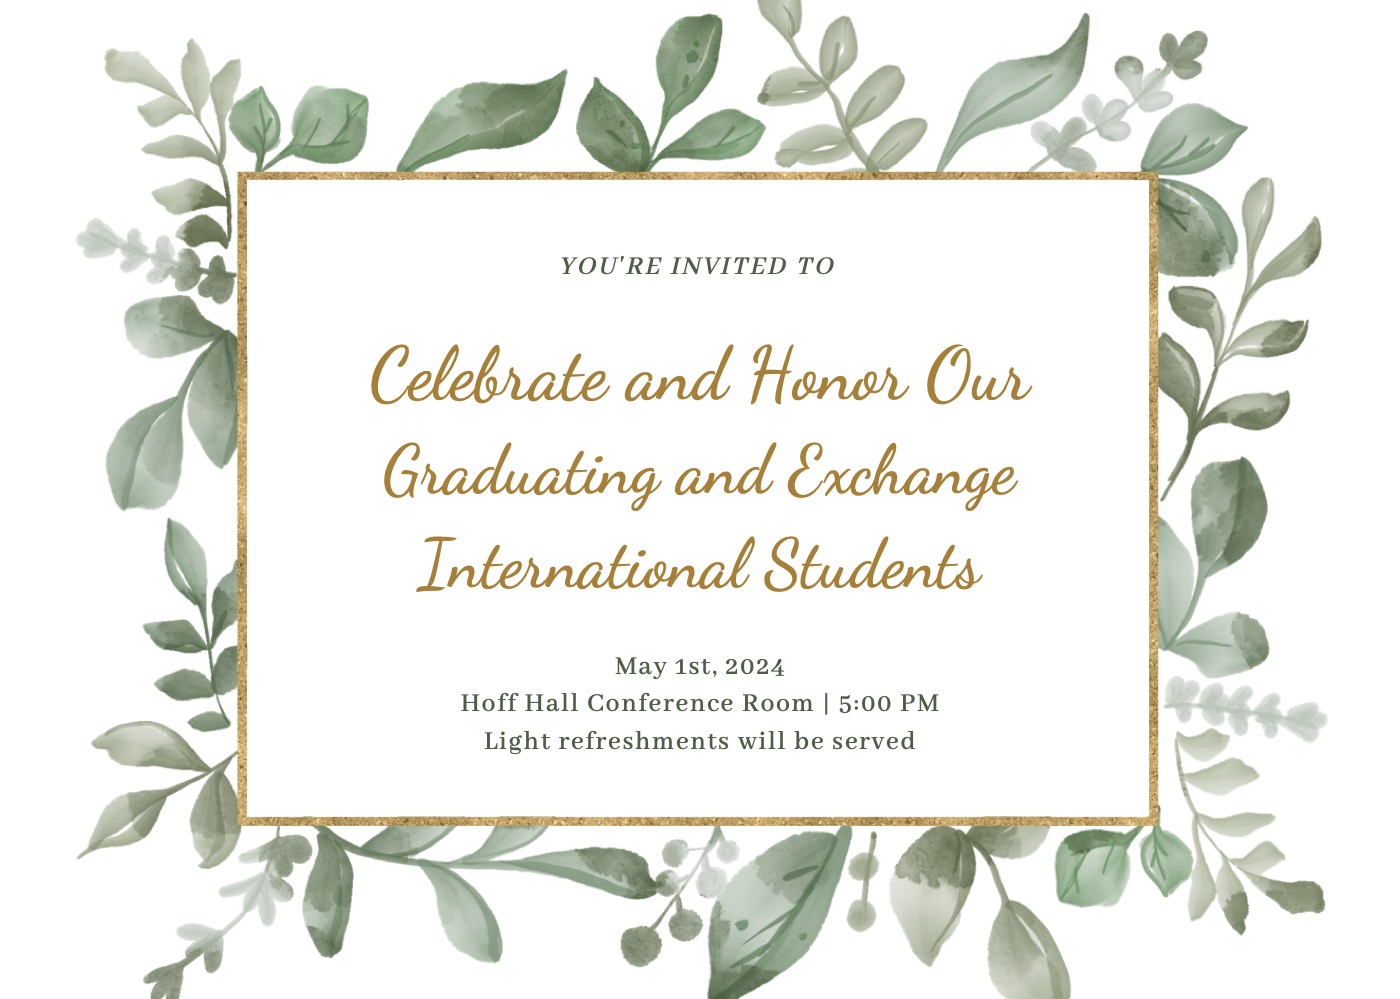 Students, faculty and staff alike are warmly welcomed to join in honoring the graduation and exchange of VTSU Castleton International Students!

Wednesday, May 1st at 5pm in the Hoff Hall Conference Room, there will be a ceremony celebrating and awarding the Graduating and Exchange International Students for their accomplishments at Castleton.

Light Refreshments will be served!

All are welcome to attend!